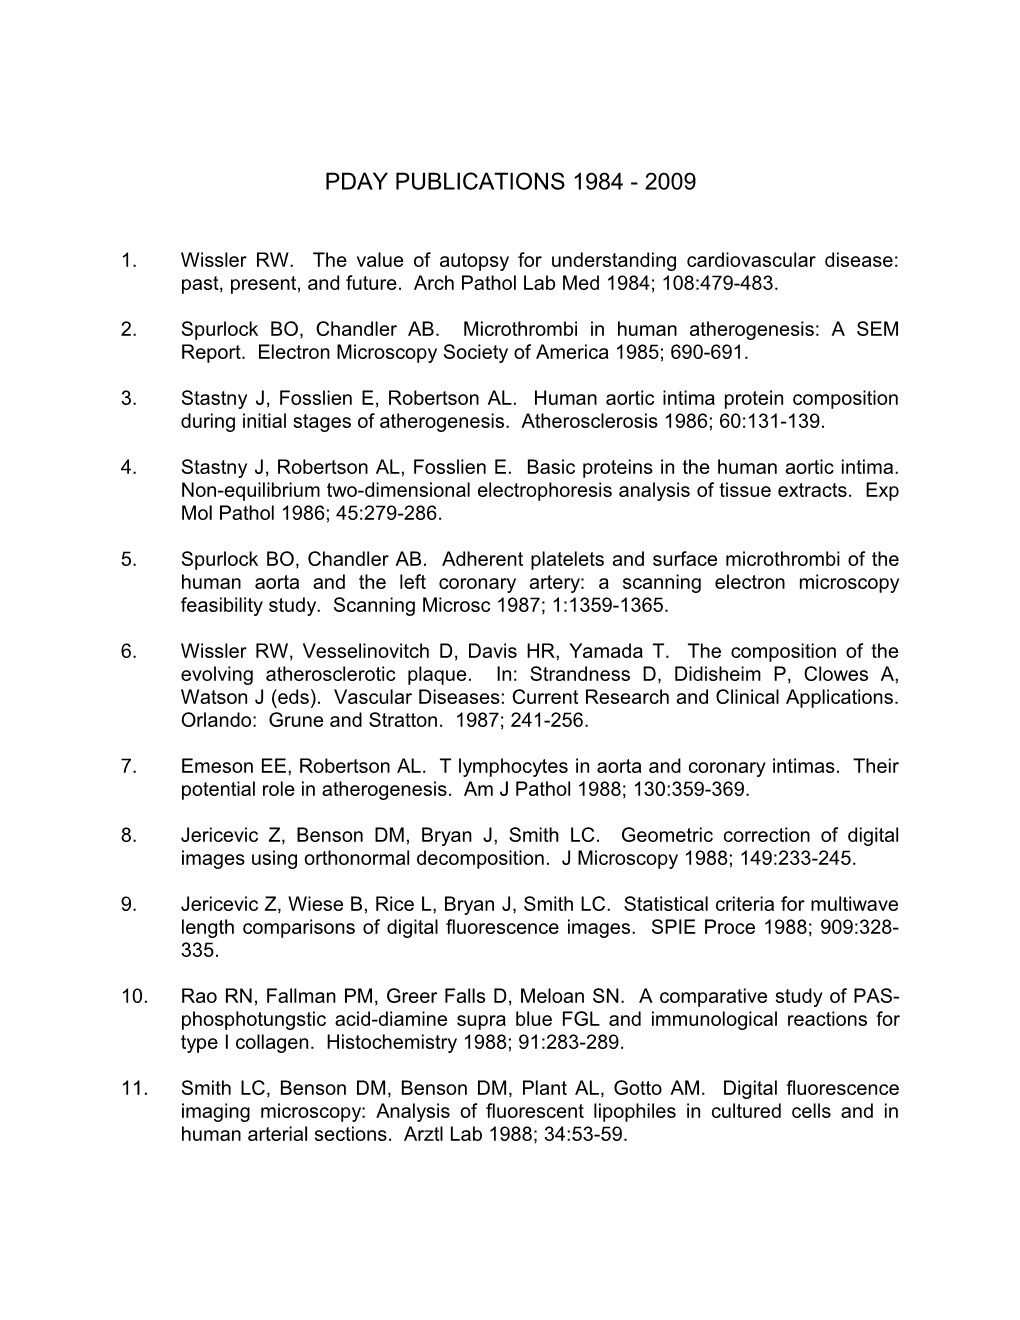 Pday Publications 1984- 2009